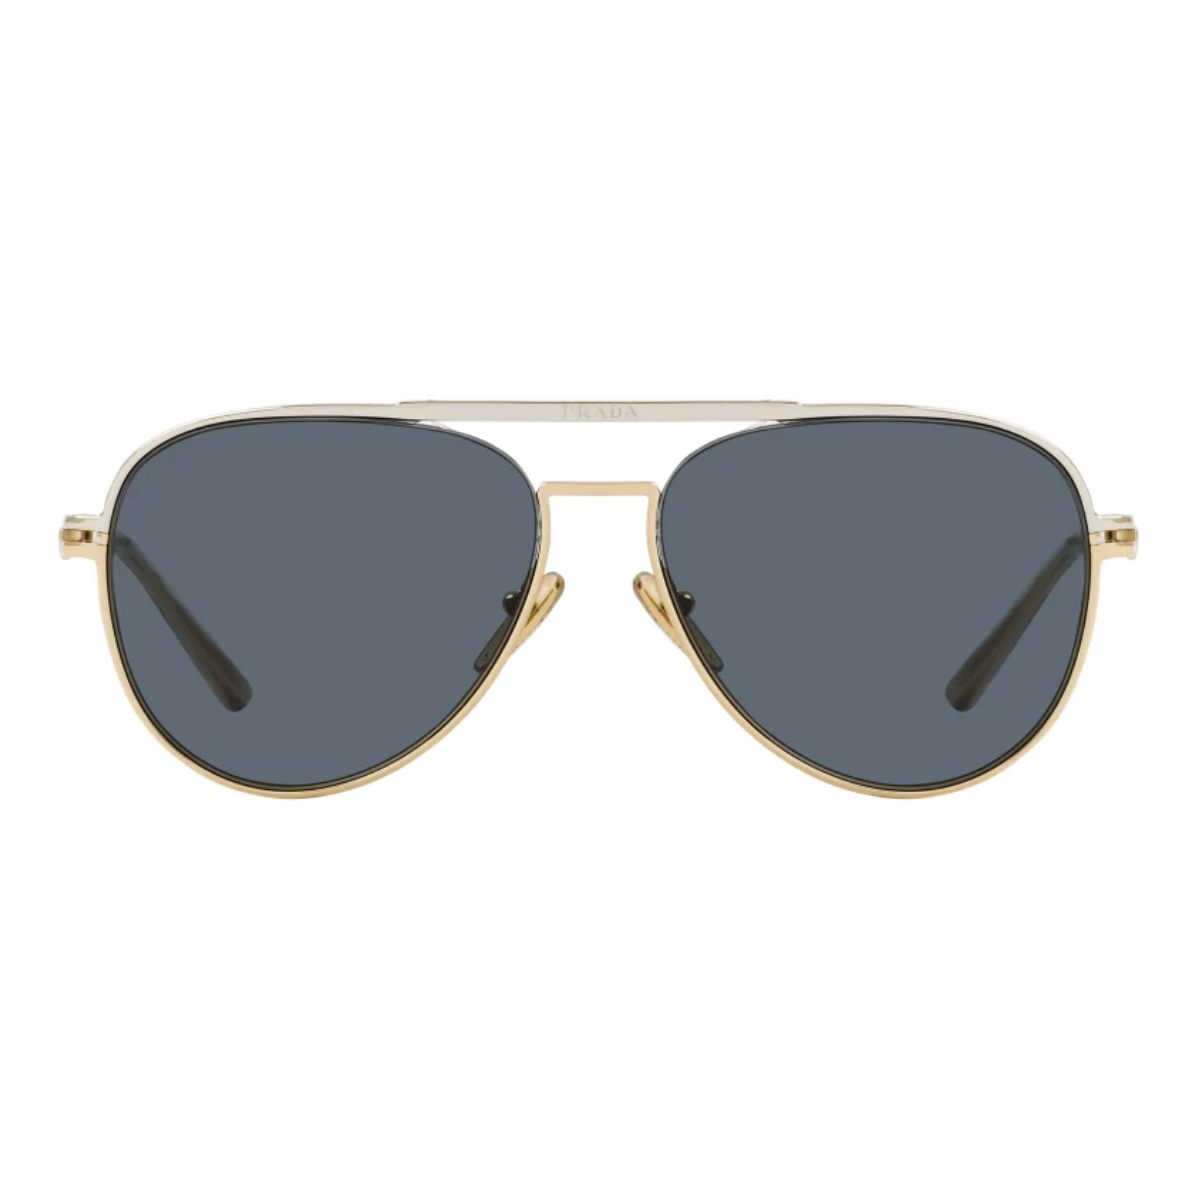 "Discover the latest in Prada eyewear for men at Optorium, featuring the authentic Prada SPR 54Z 17F 09T Gold aviator sunglasses. Elevate your look with designer shades you'll love."